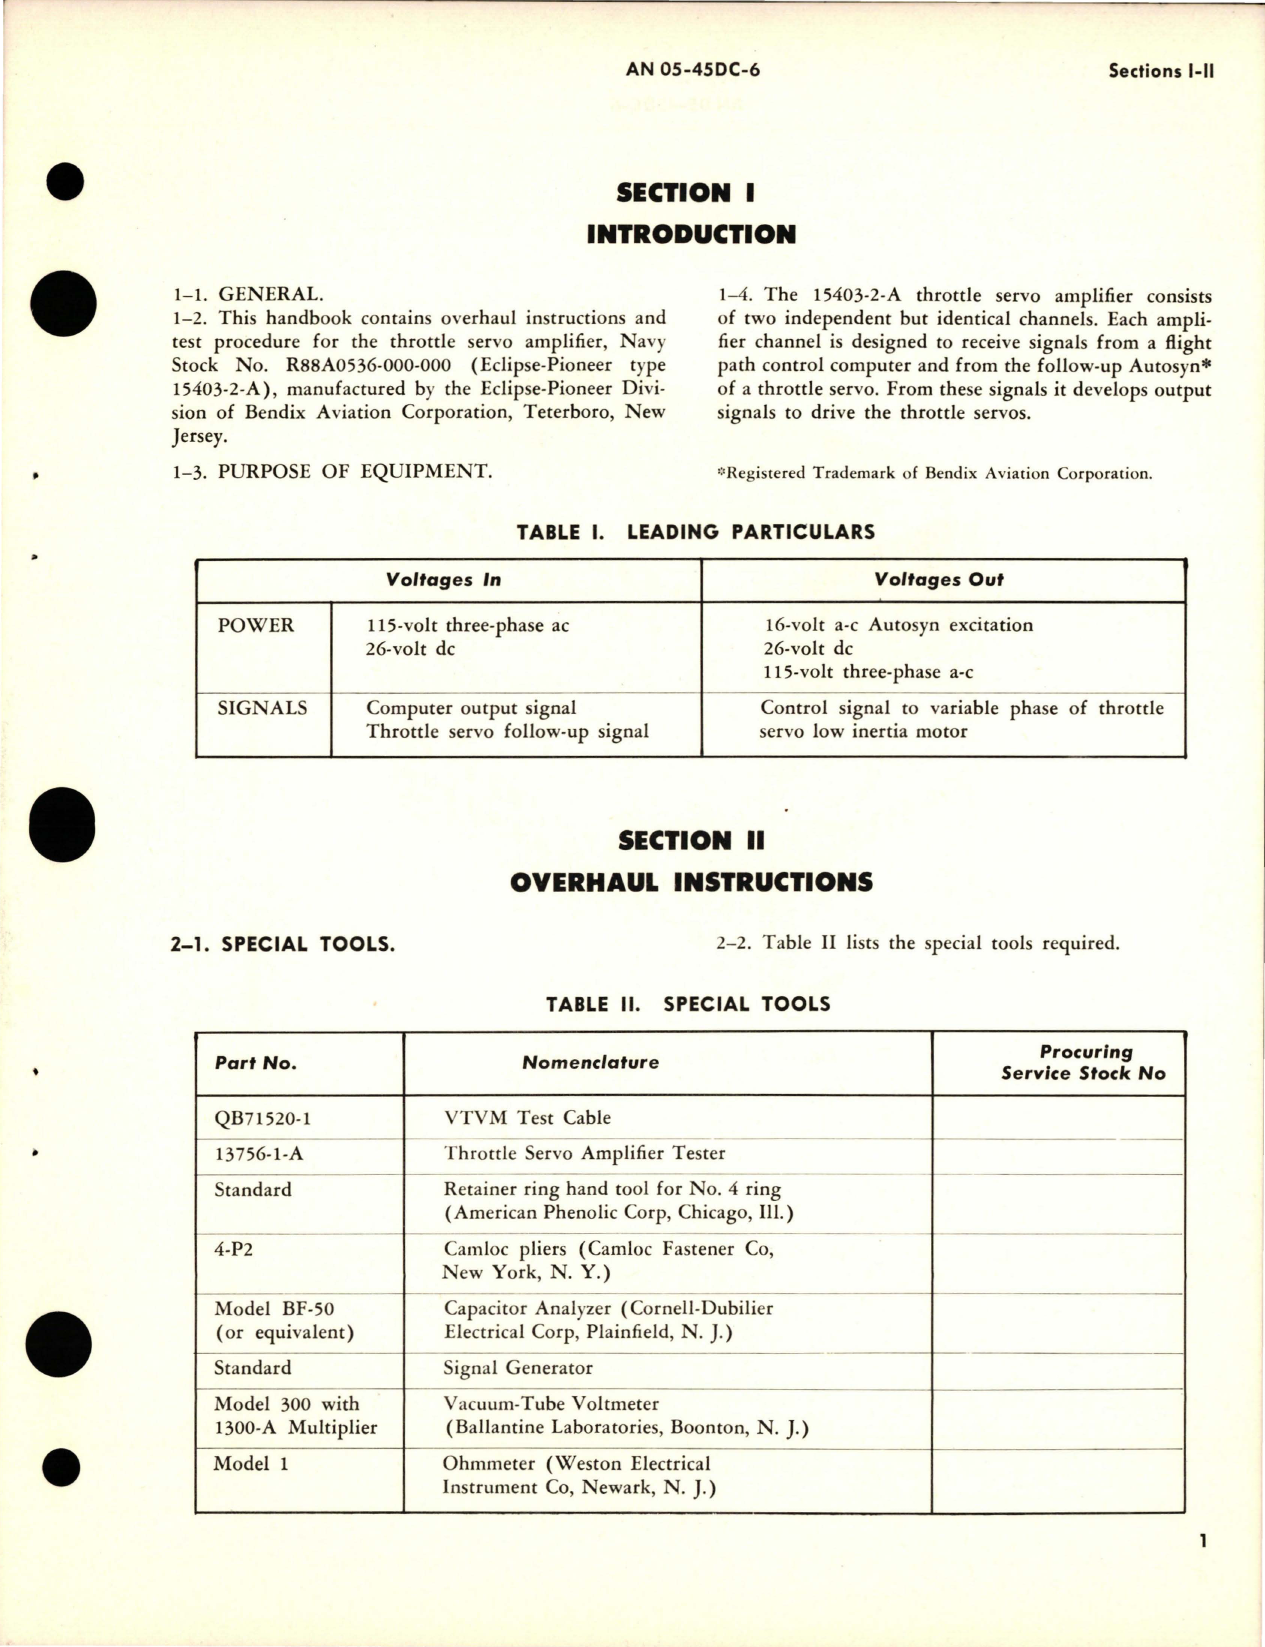 Sample page 5 from AirCorps Library document: Overhaul Instructions for Throttle Servo Amplifier - Part 15403-2-A